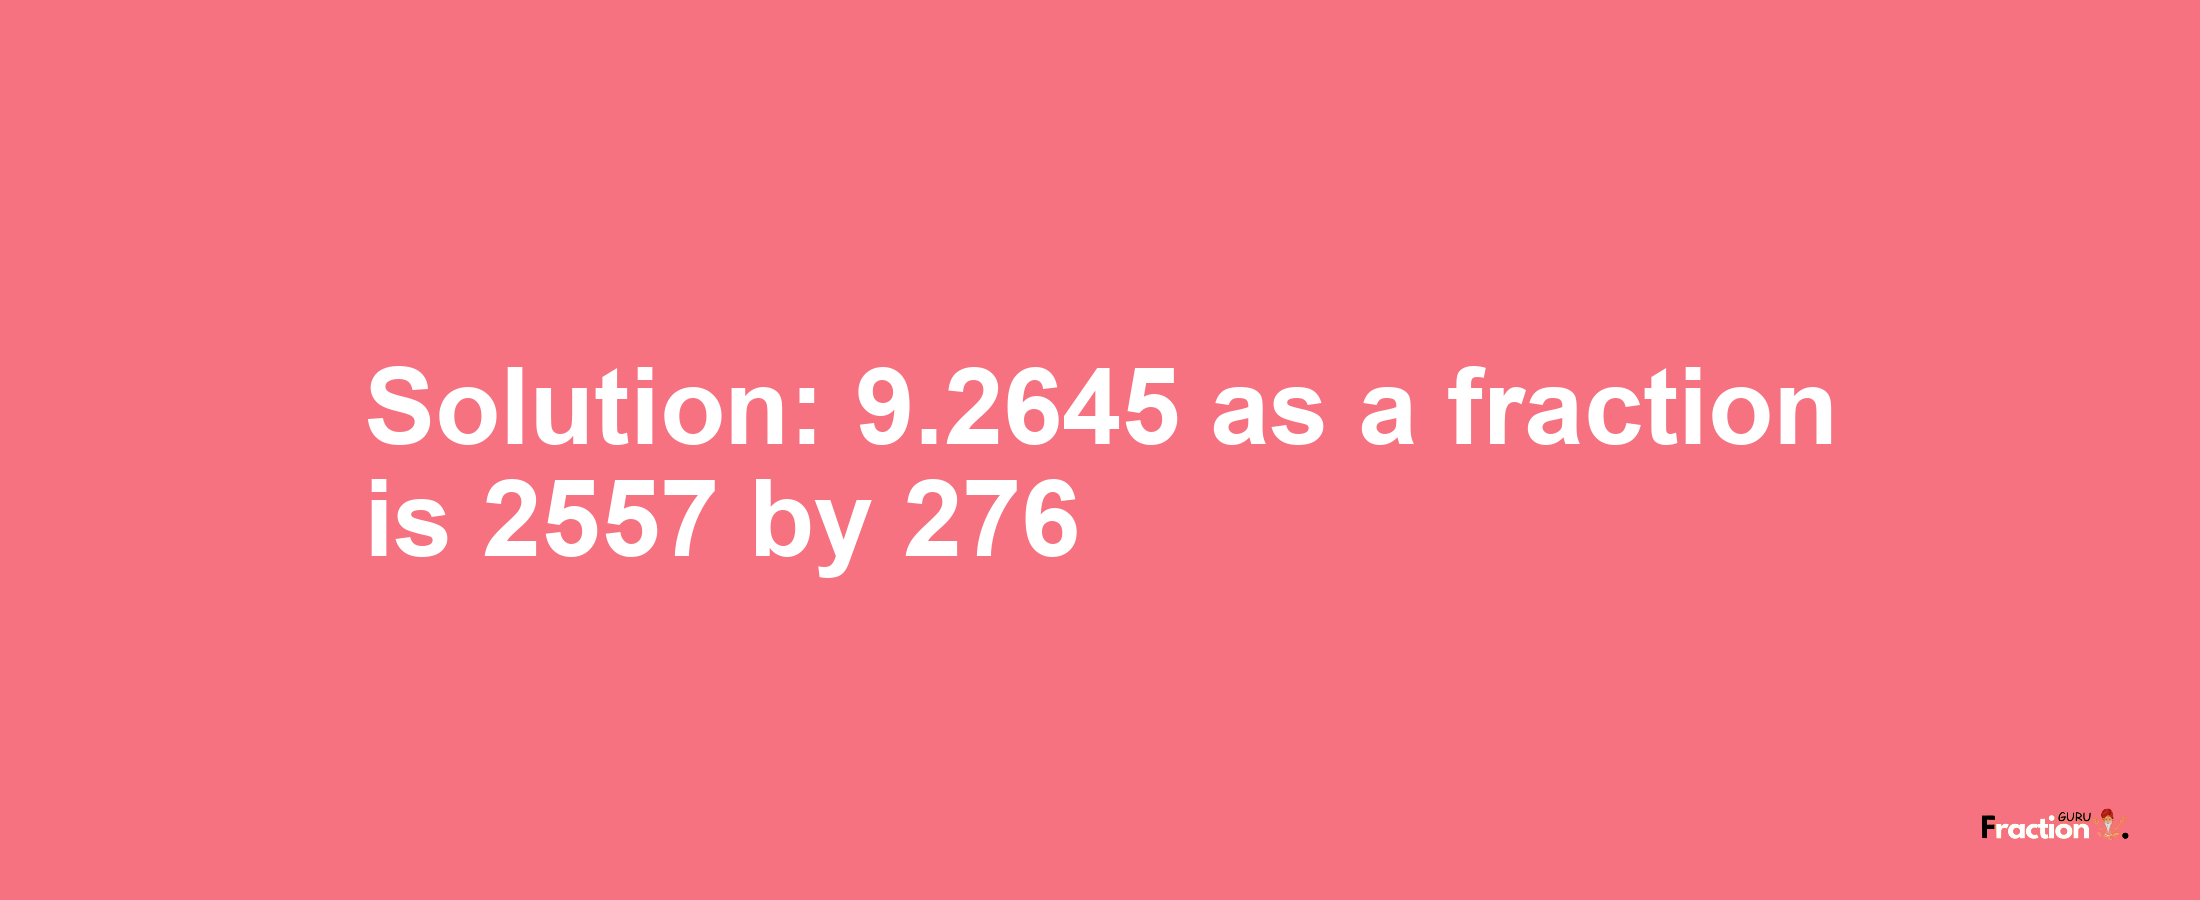 Solution:9.2645 as a fraction is 2557/276